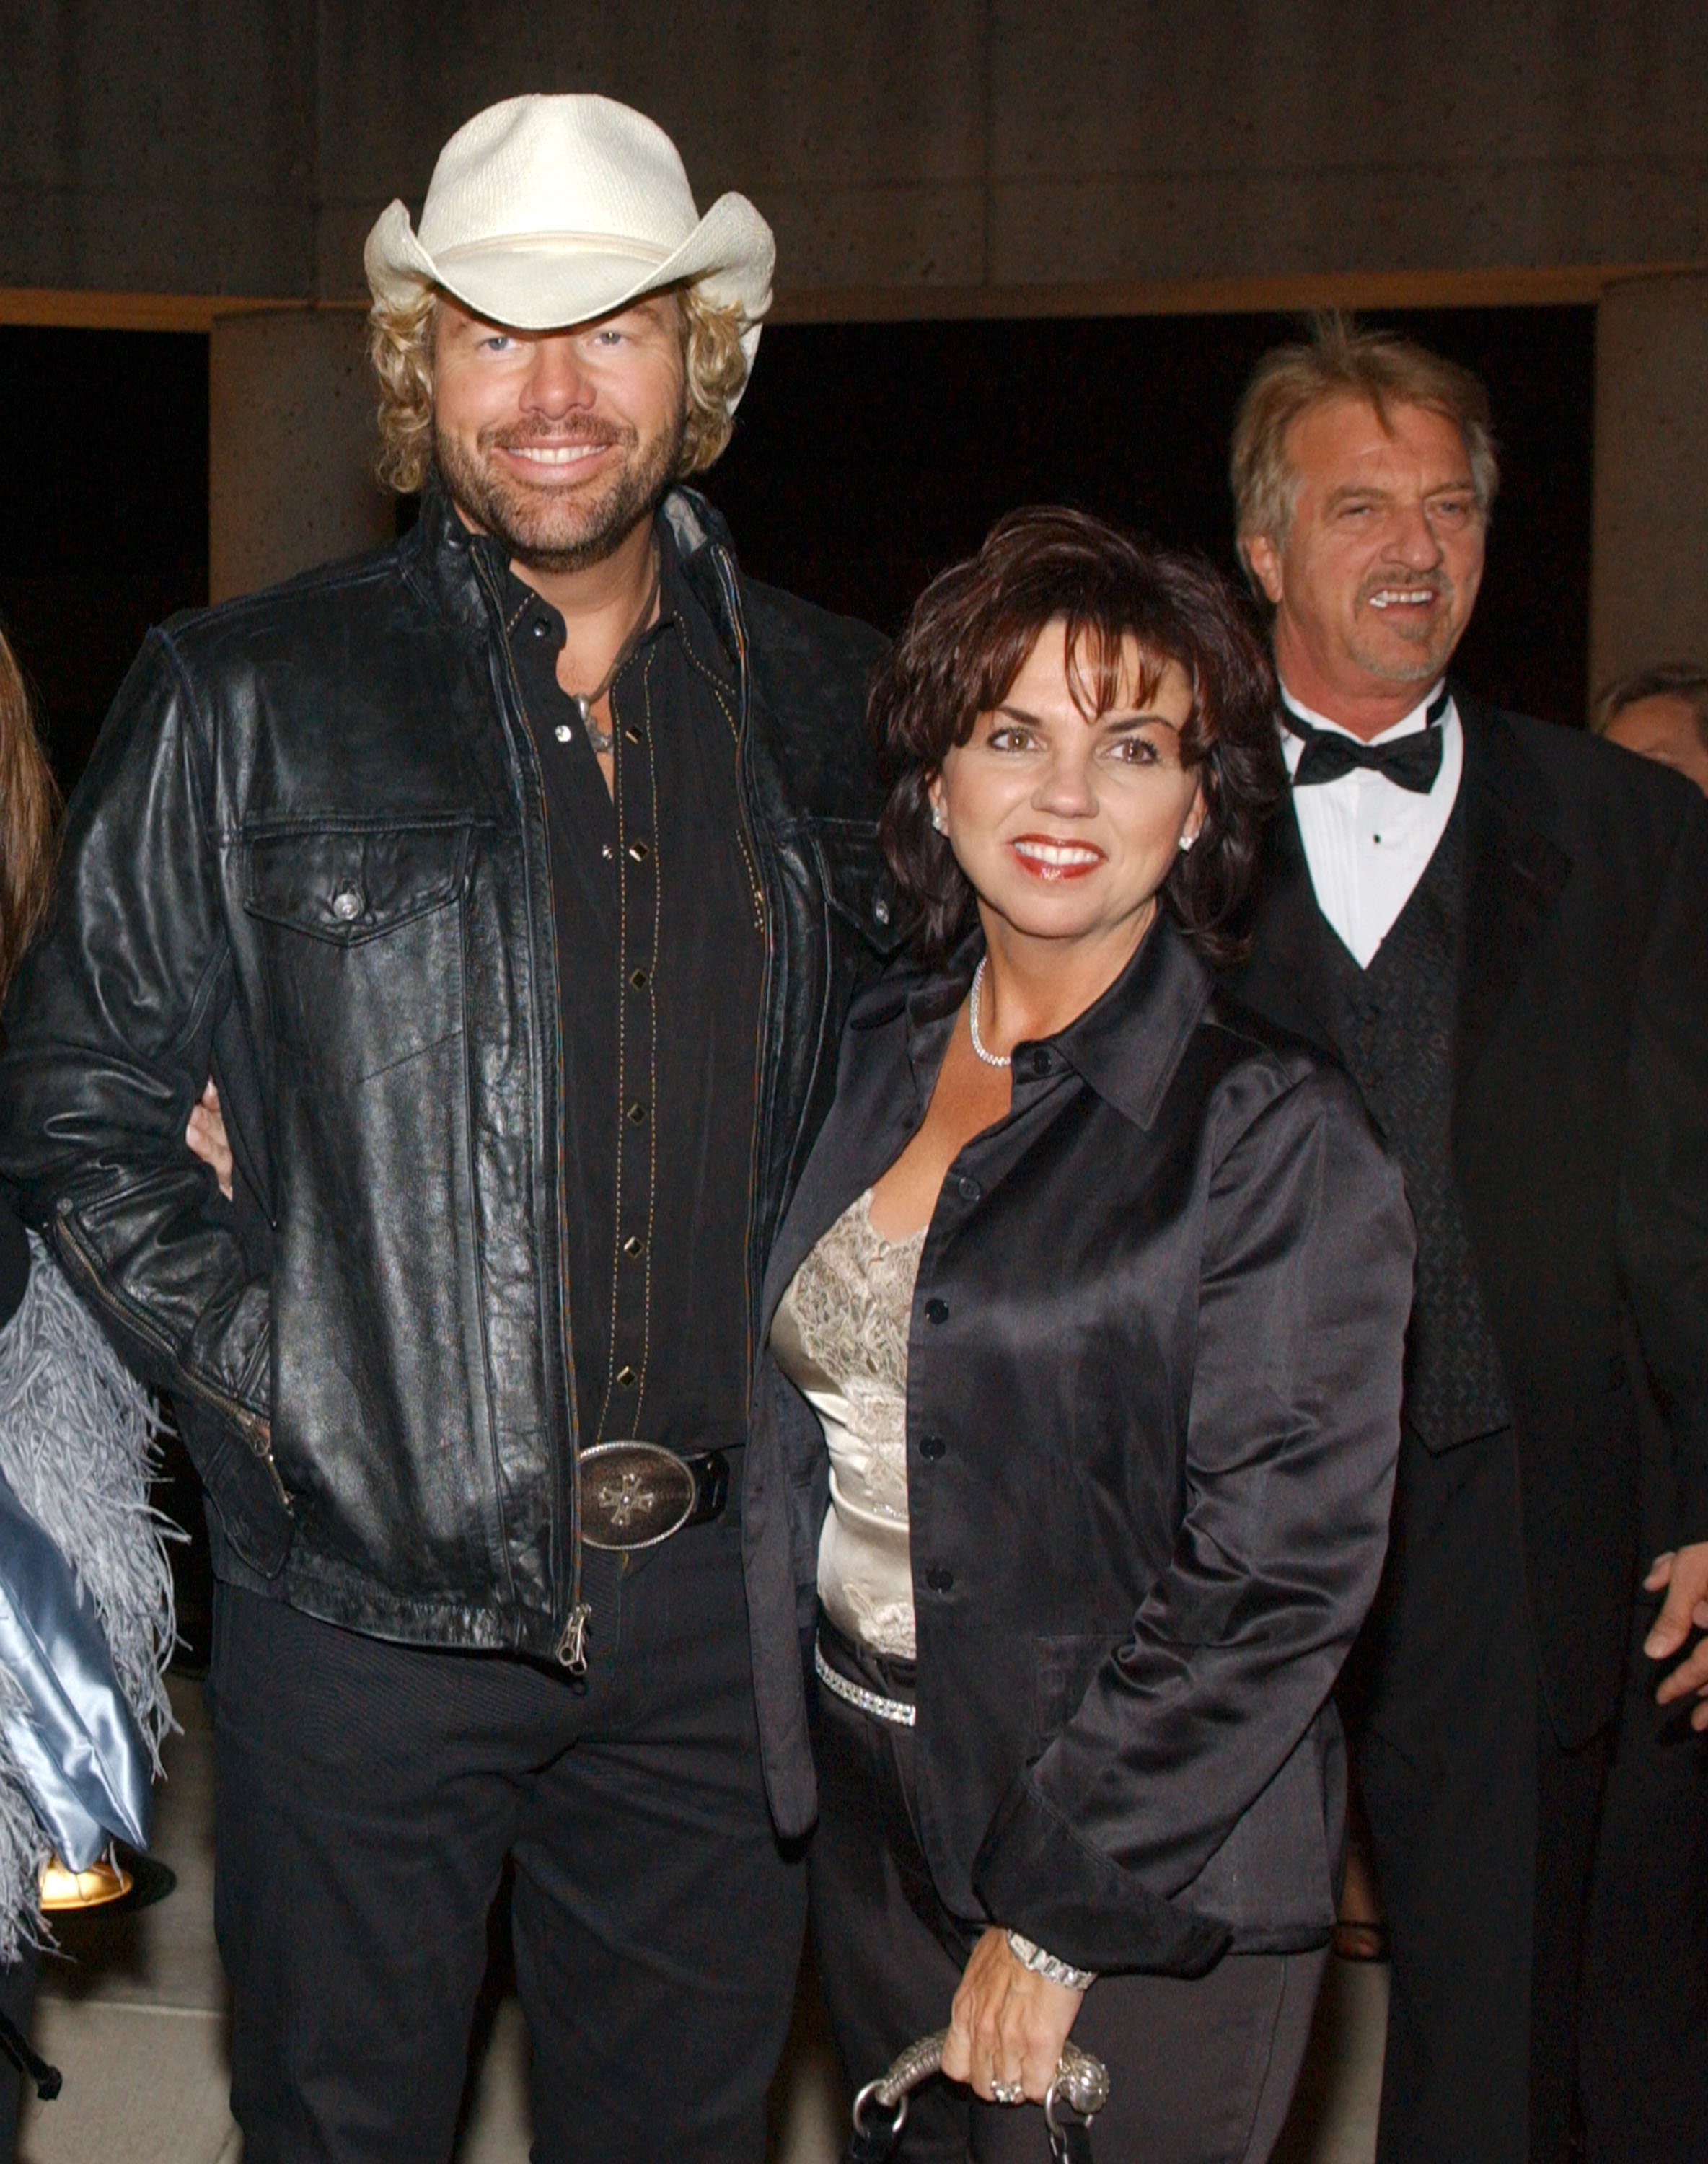 Toby Keith and wife Tricia Keith at the 52nd Annual BMI Country Awards on\u00a0November 8, 2004. | Source: Getty Images